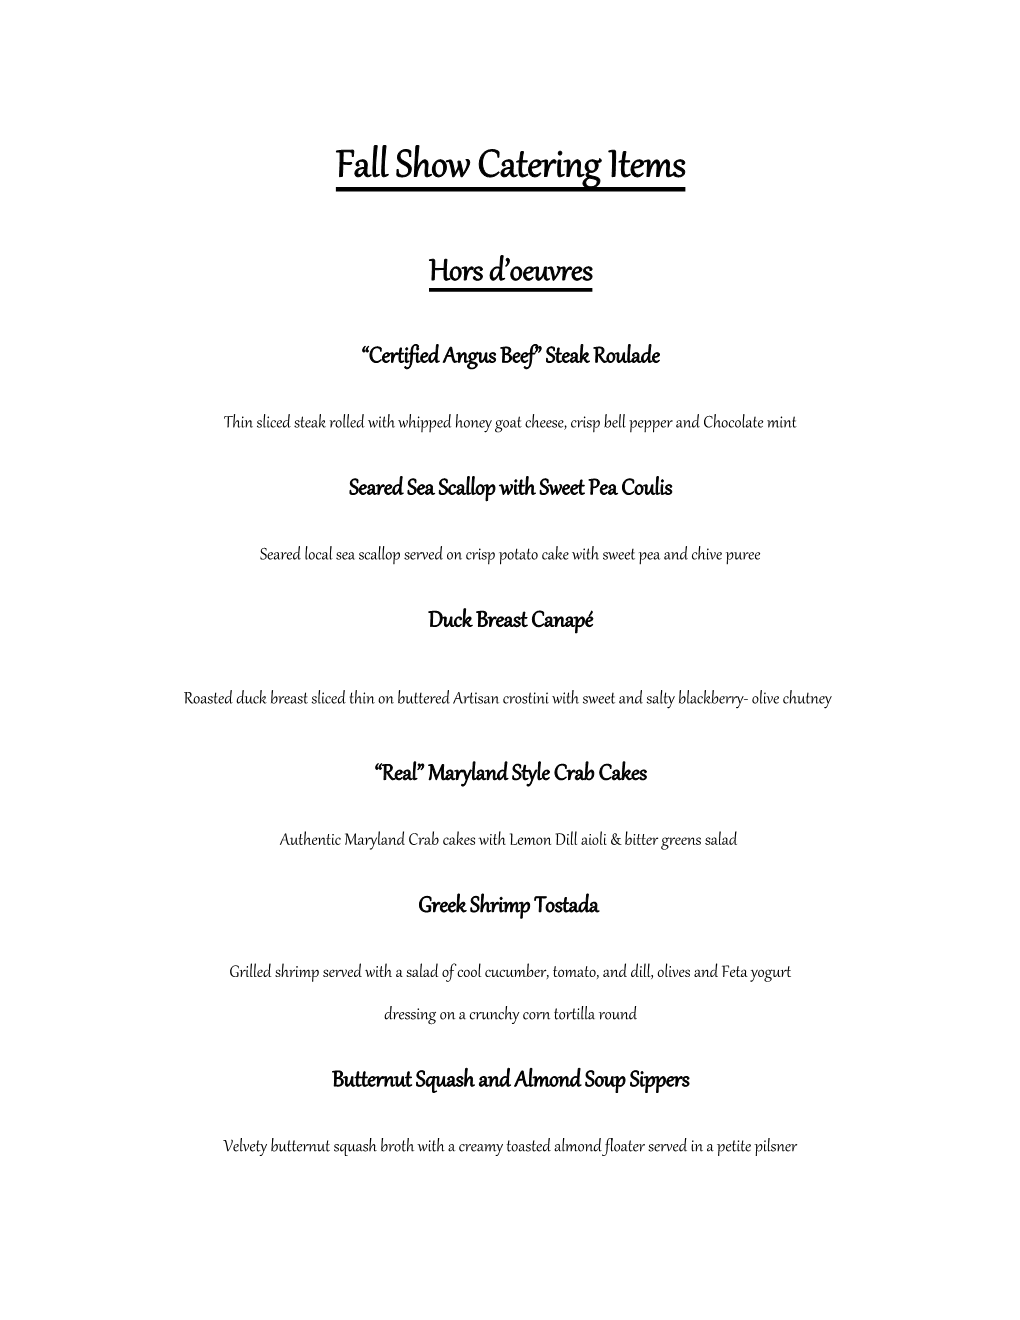 Fall Show Catering Items